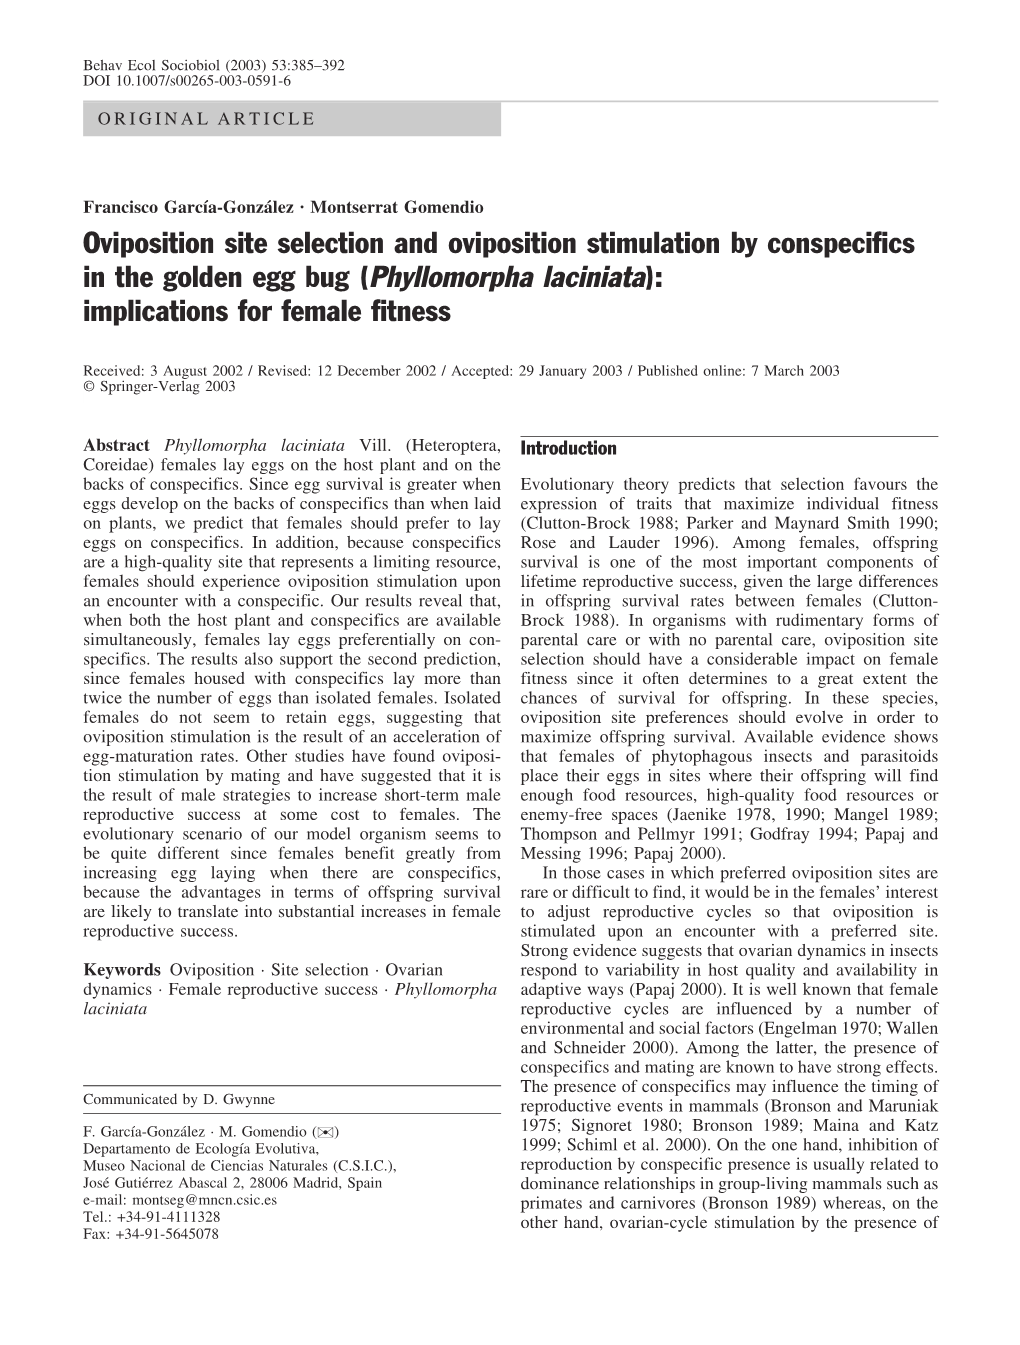 Oviposition Site Selection and Oviposition Stimulation by Conspecifics in the Golden Egg Bug (Phyllomorpha Laciniata): Implications for Female Fitness